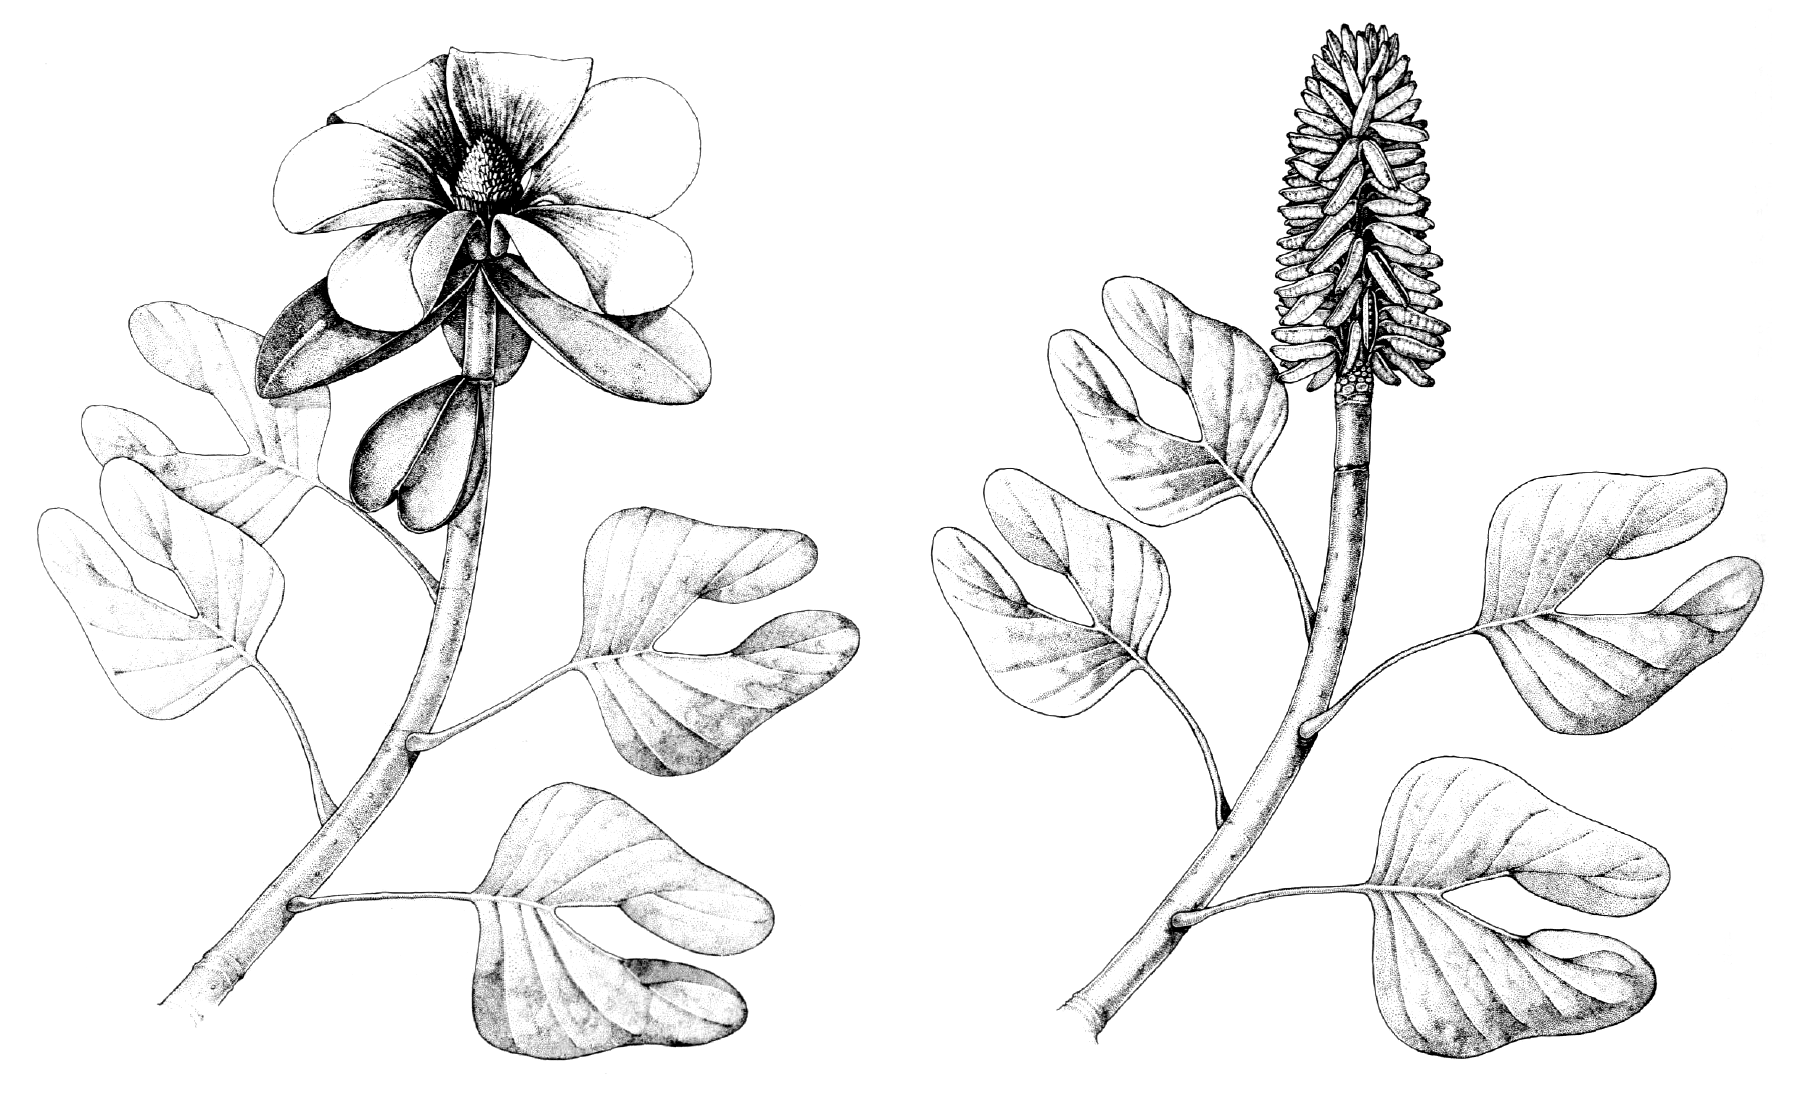 Drawings showing reconstructions of Archaeanthus, an extinct Magnolia-like plant, in flower and in fruit.